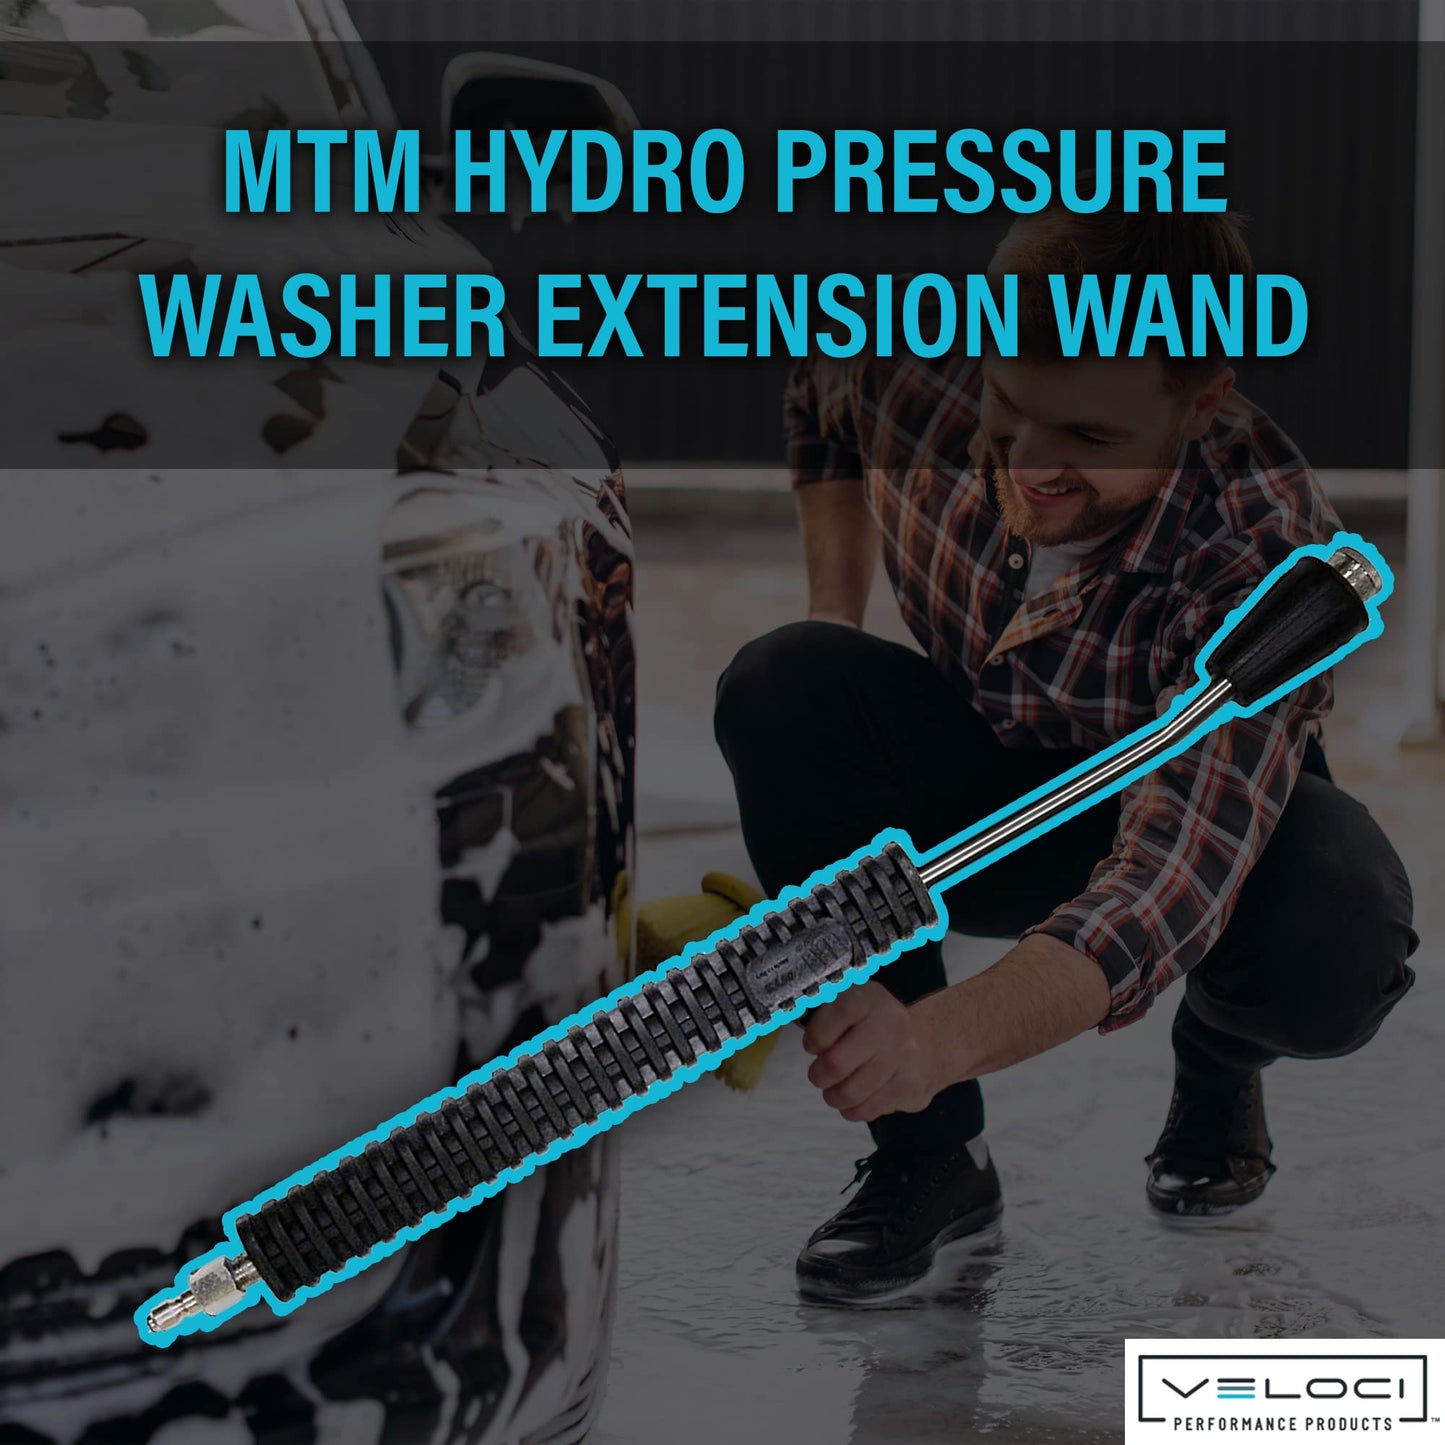 MTM Hydro Pressure Washer 20? Extension Wand Kit, High Pressure Sprayer 4100 PSI for Car Wash and Detailing, Pressure Washer Accessories for Foam Cannon